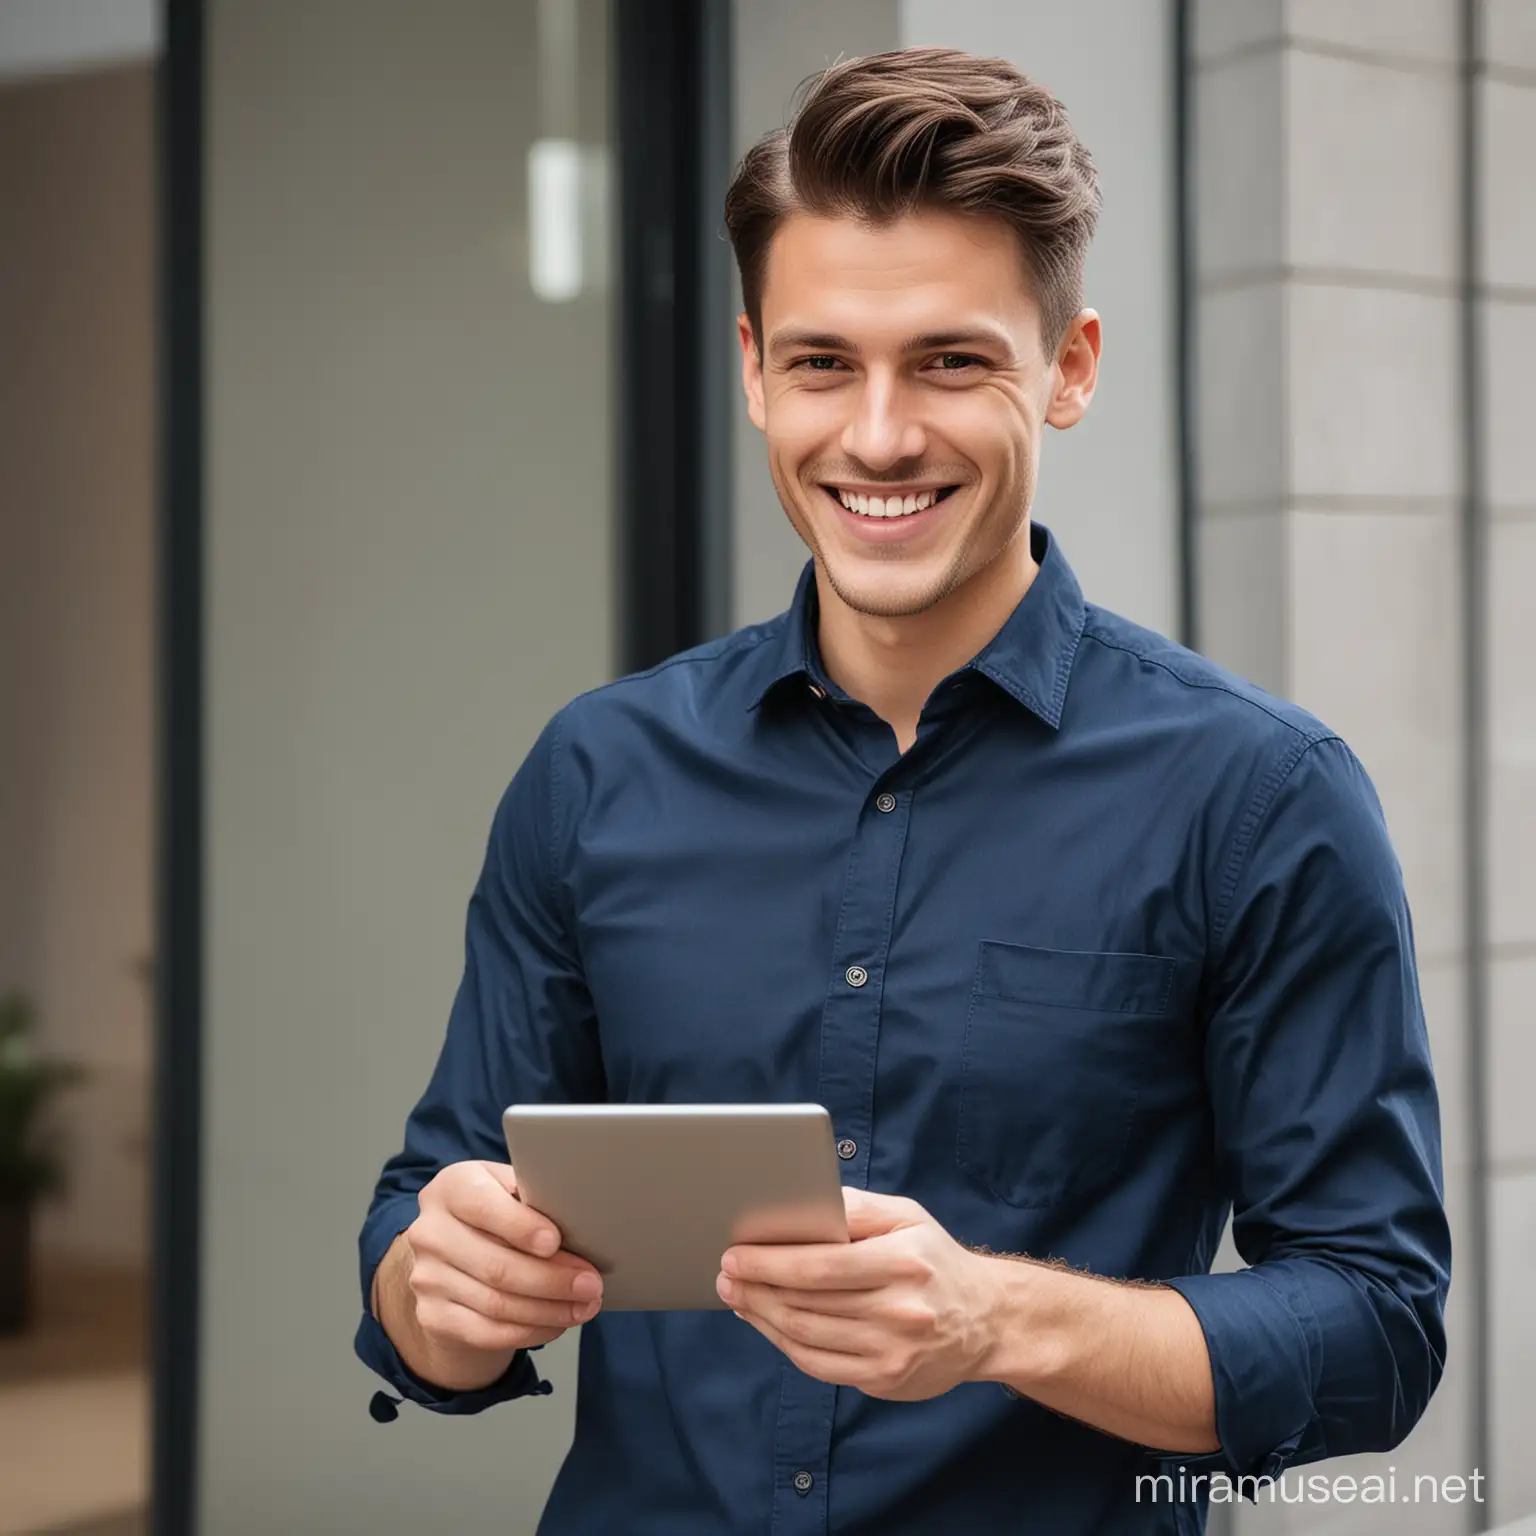 Young Man in Dark Blue Shirt Using Tablet Outdoors After Work